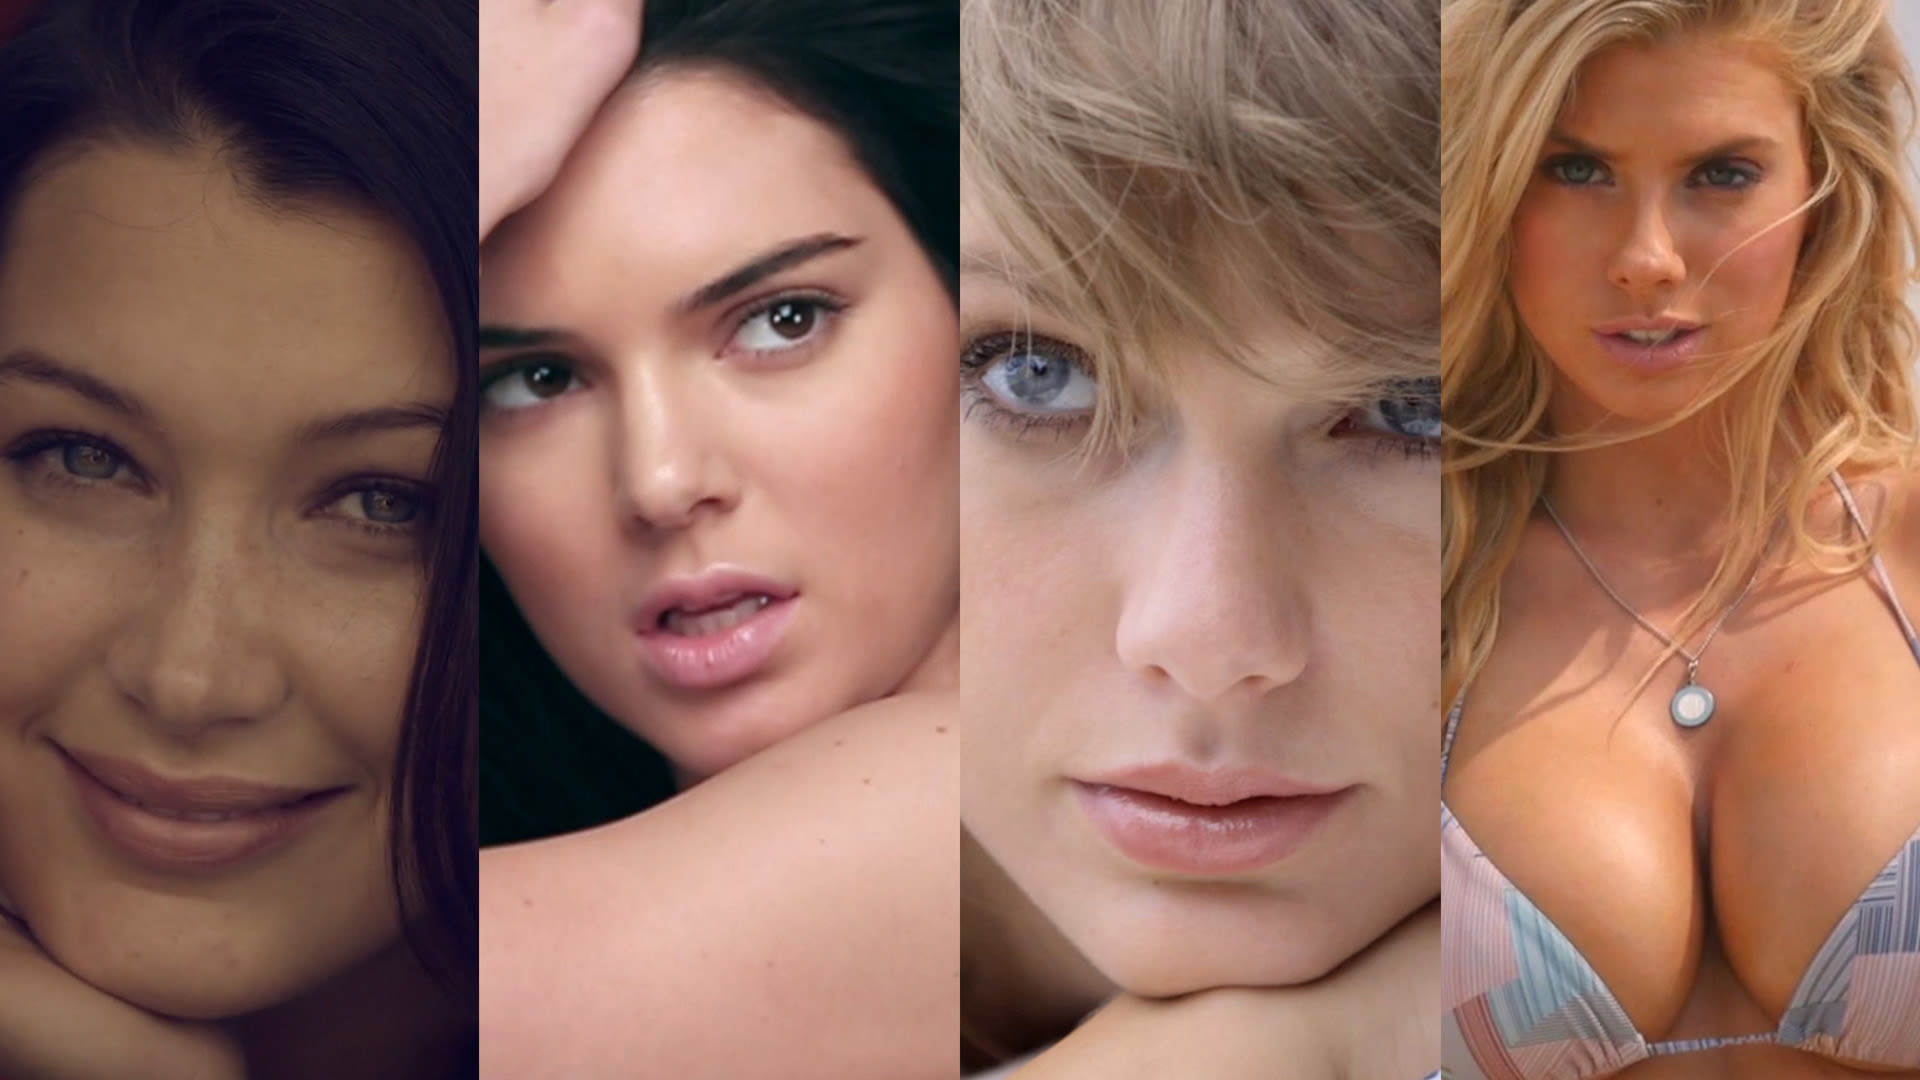 Watch See the Sexiest Women of 2015, All at Once | GQ